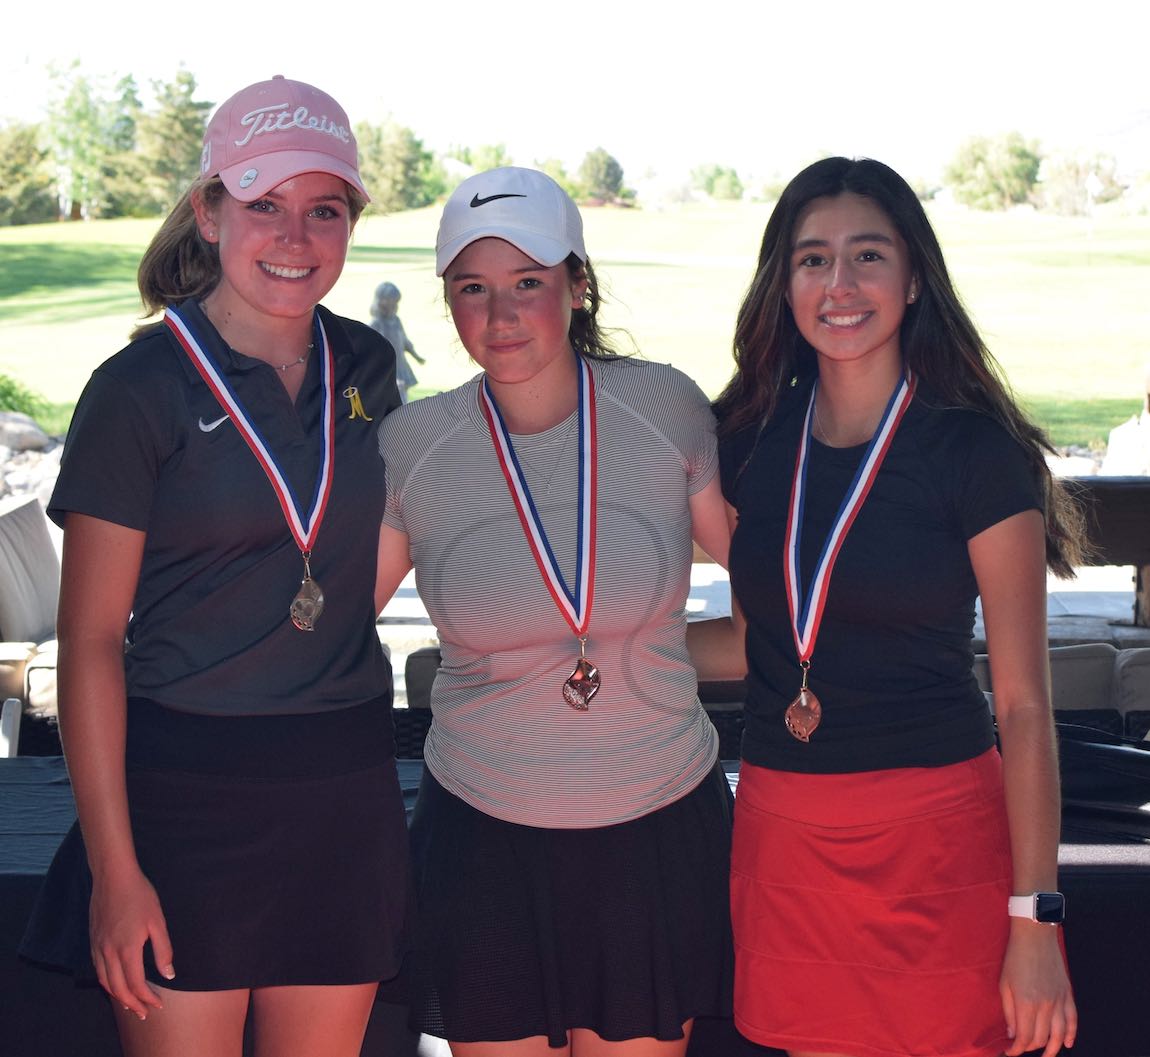 Three female Junior Golf winners, standing wearing their medallion awards from the Reno Optimist Club annual qualifier golf event at Red Hawk Golf Course.